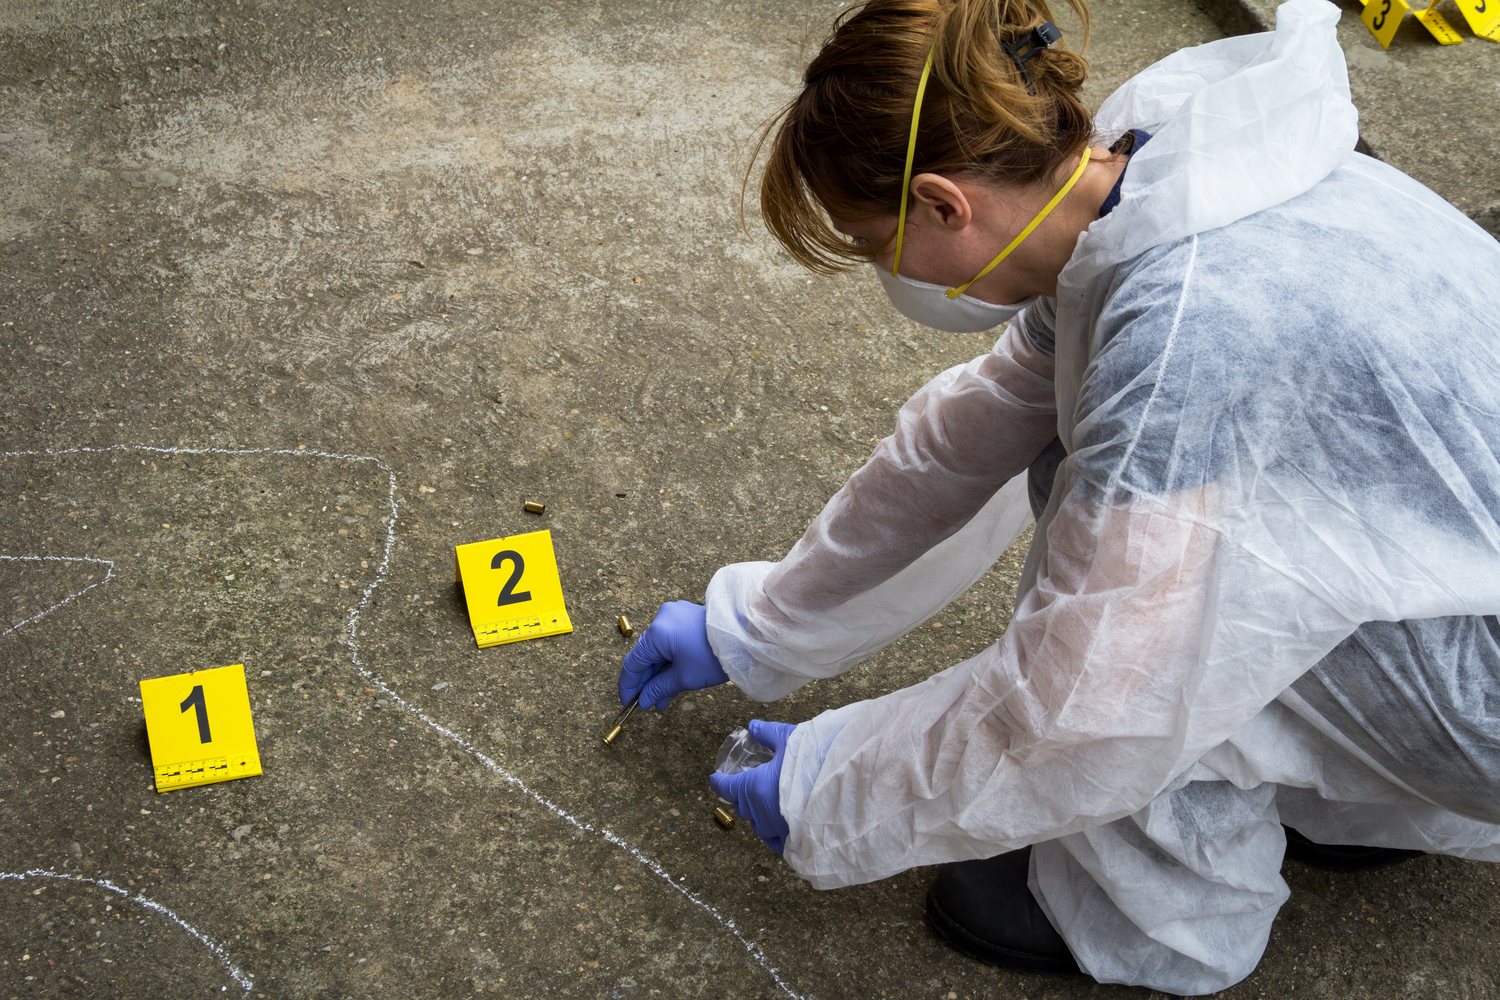 How to document a crime scene - evidence collection